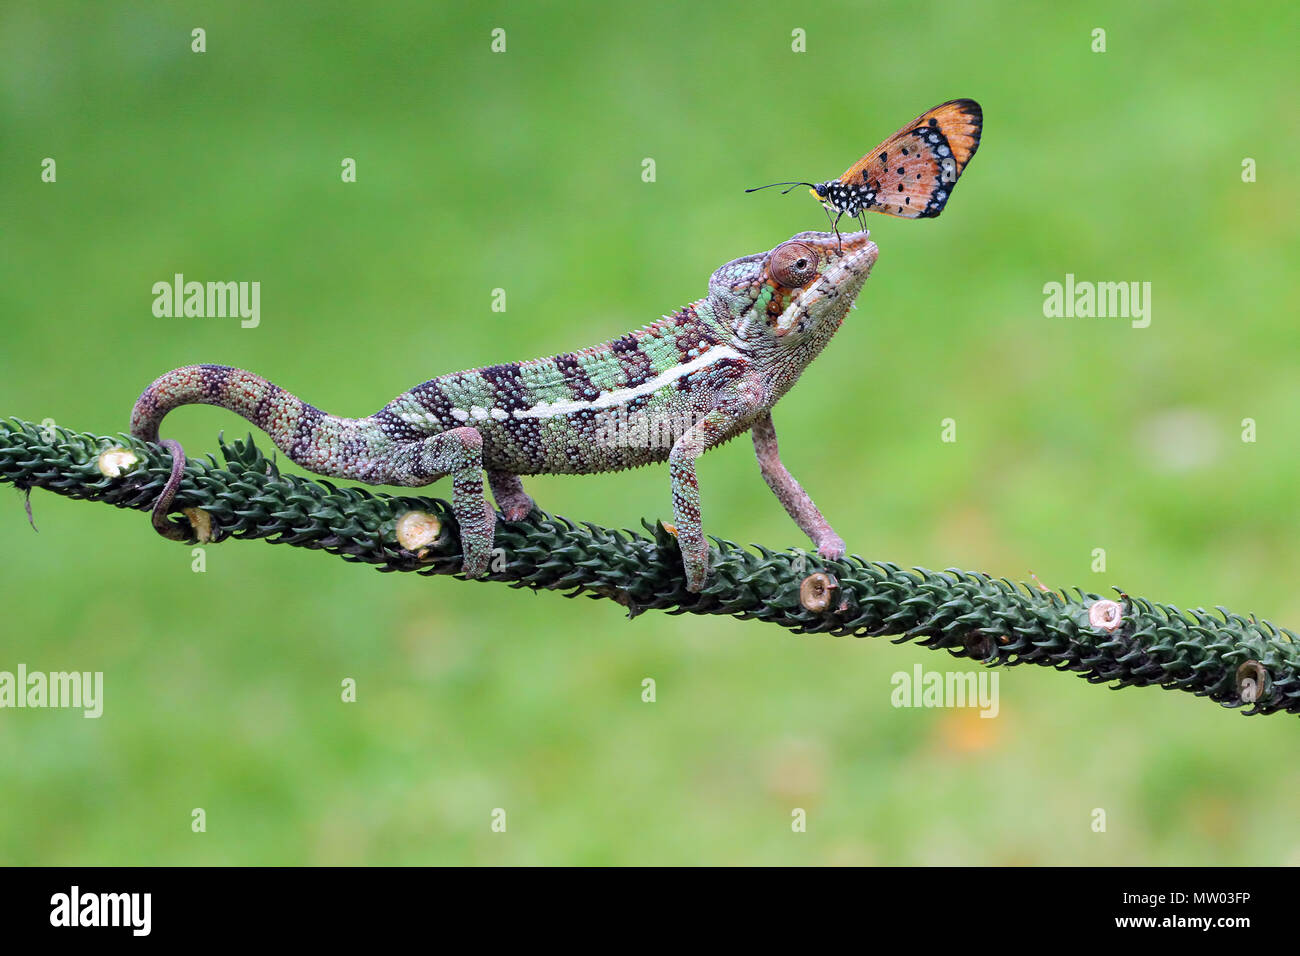 Butterfly on a Chameleon's head Stock Photo